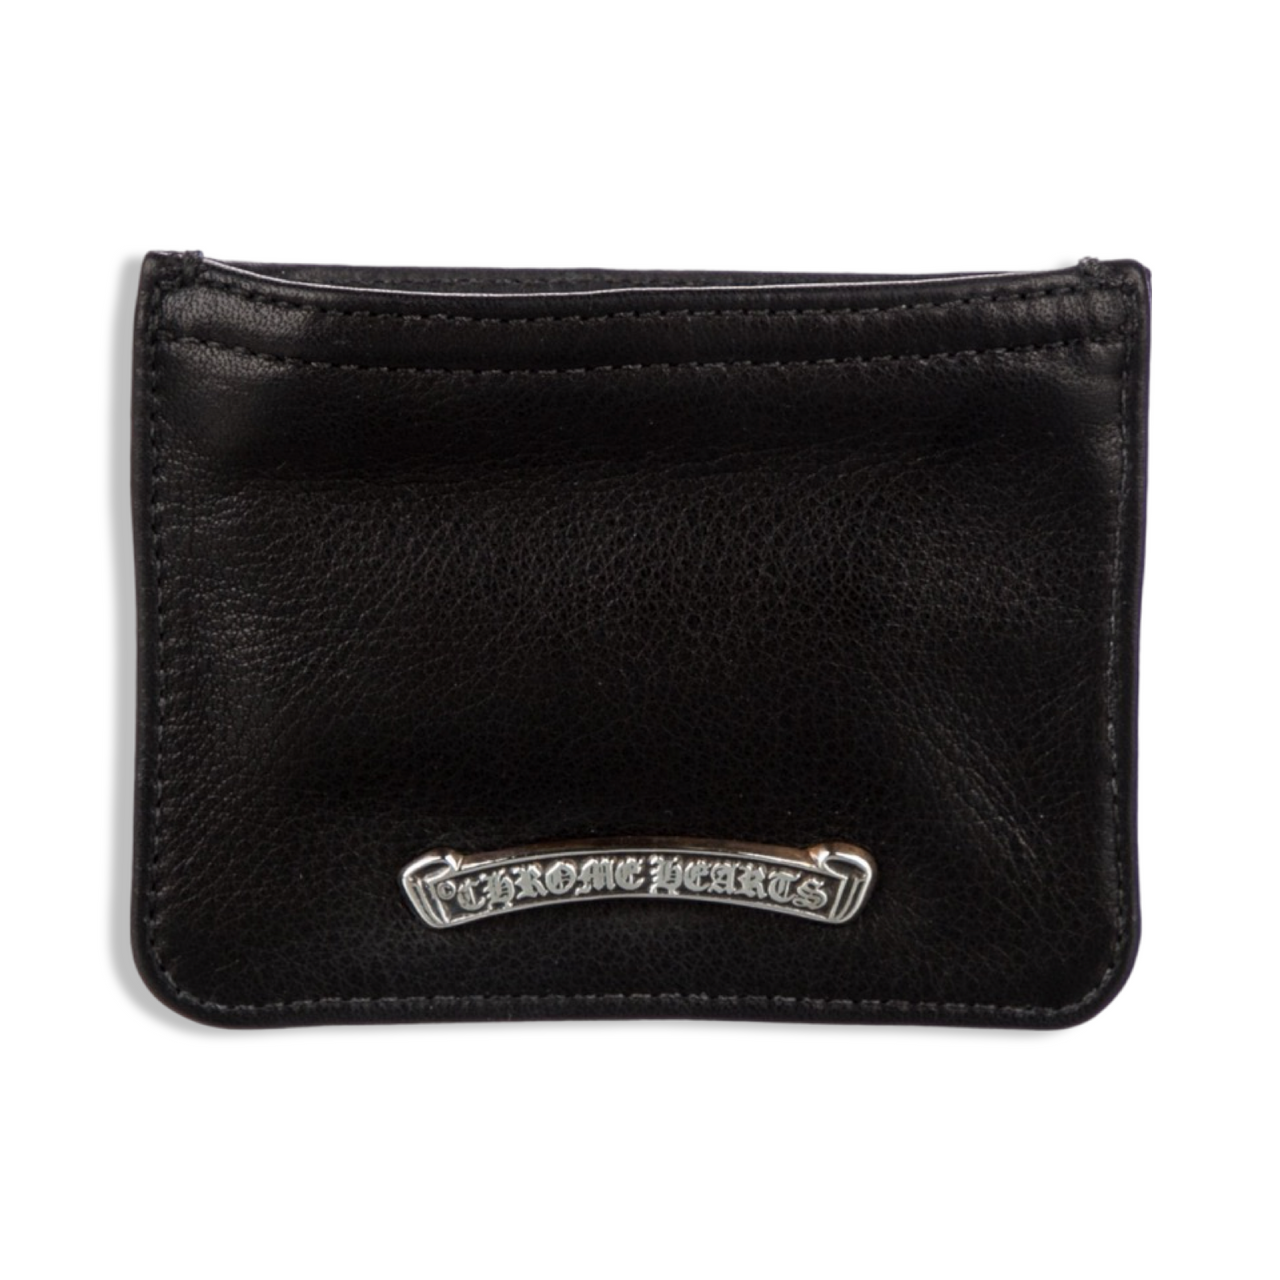 Chrome Hearts Leather Wallet